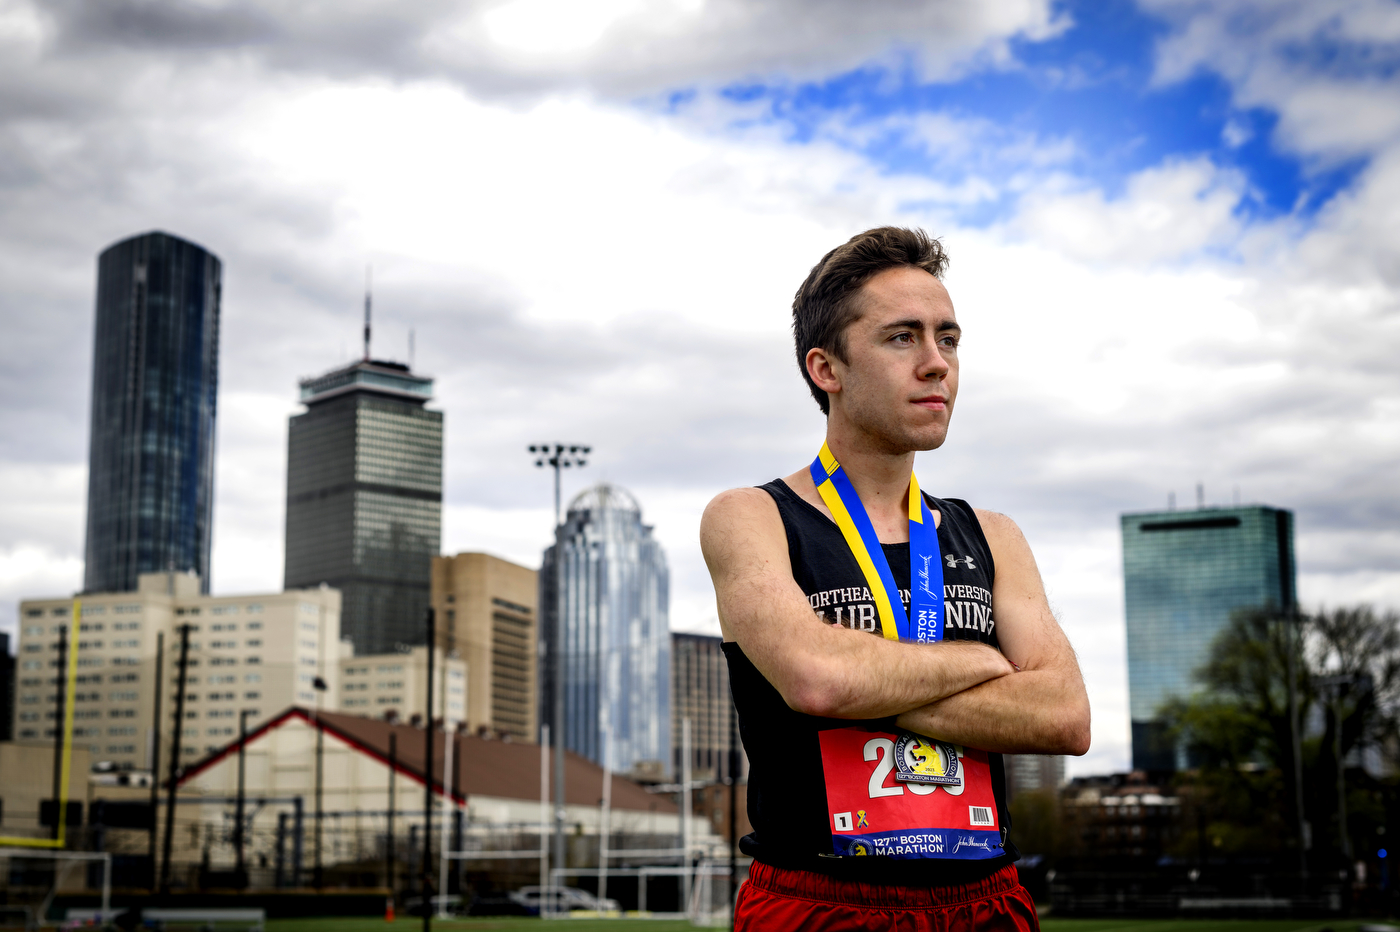 A runner with a medal around his neck stands with arms crossed in front of the Boston skyline.